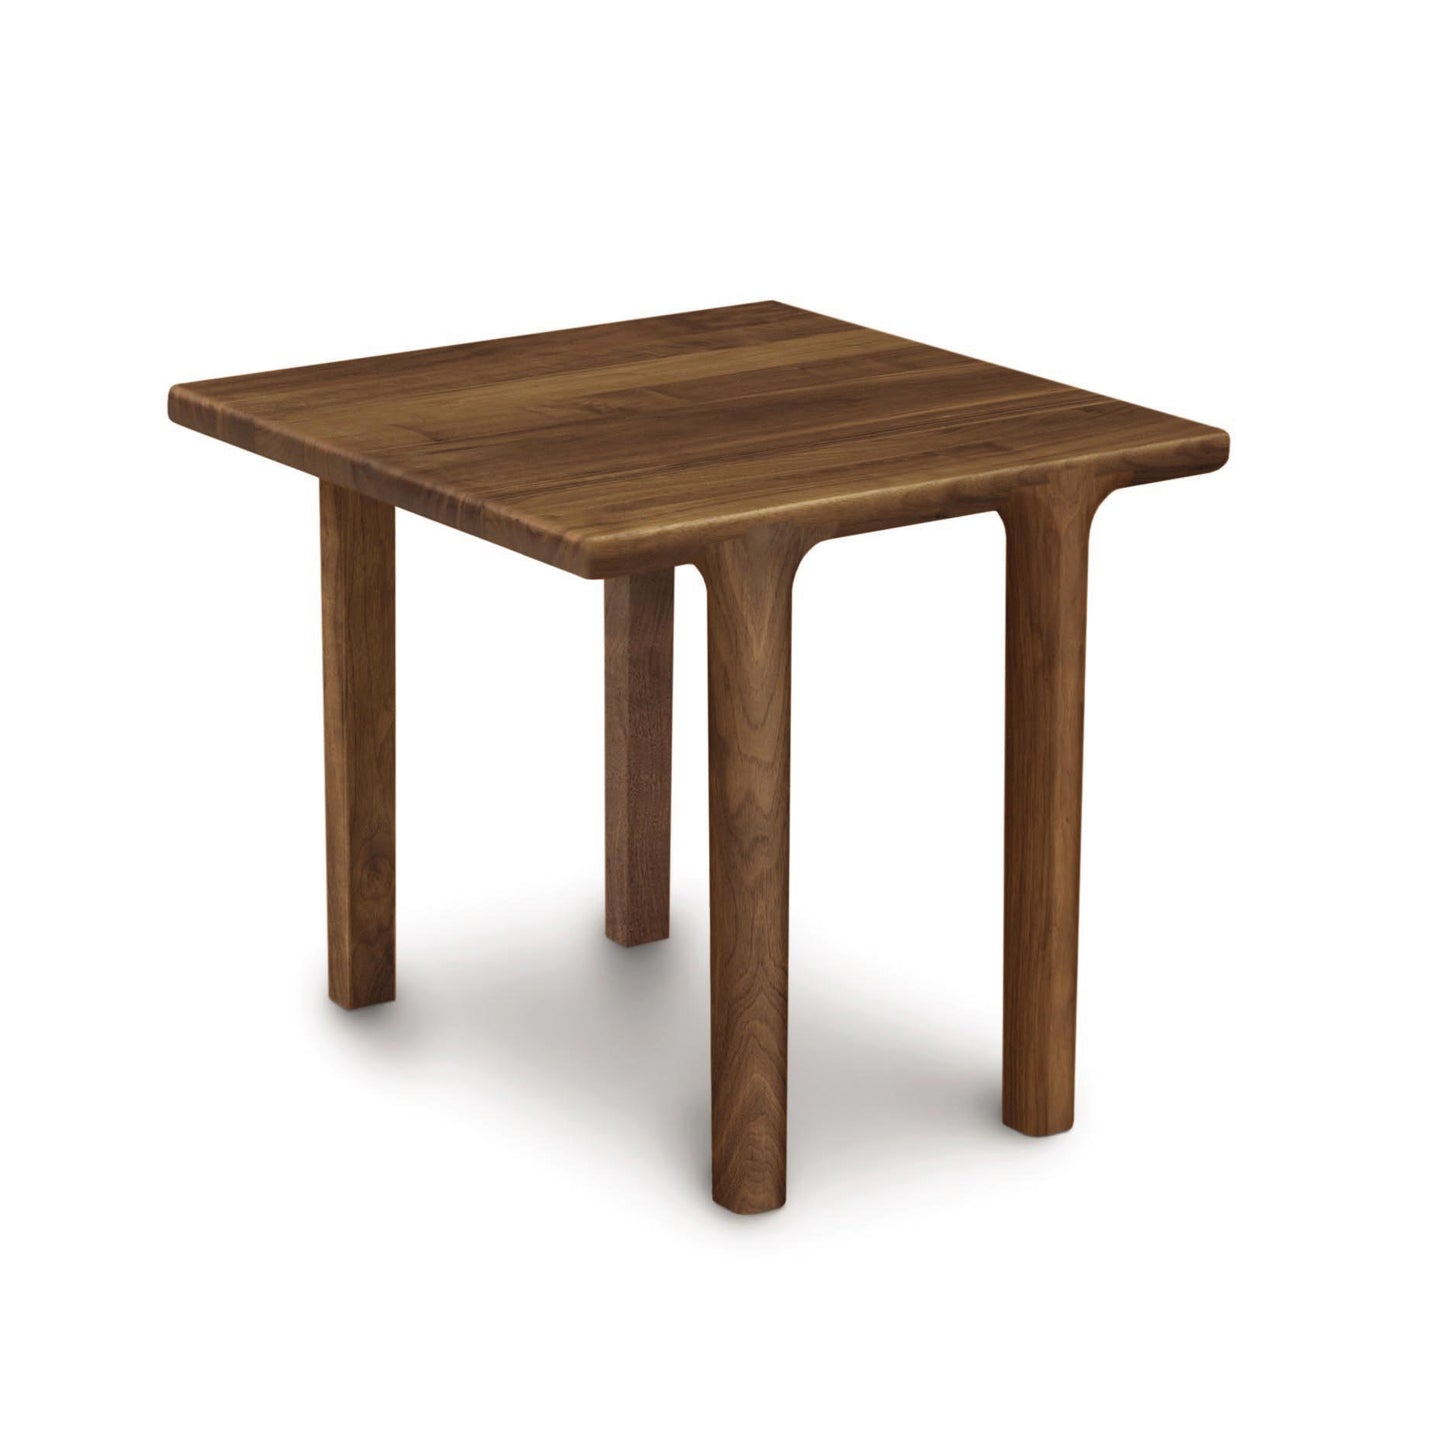 A Copeland Furniture Sierra Square End Table, made from North American hardwood, with contemporary lines and four legs, isolated on a white background.